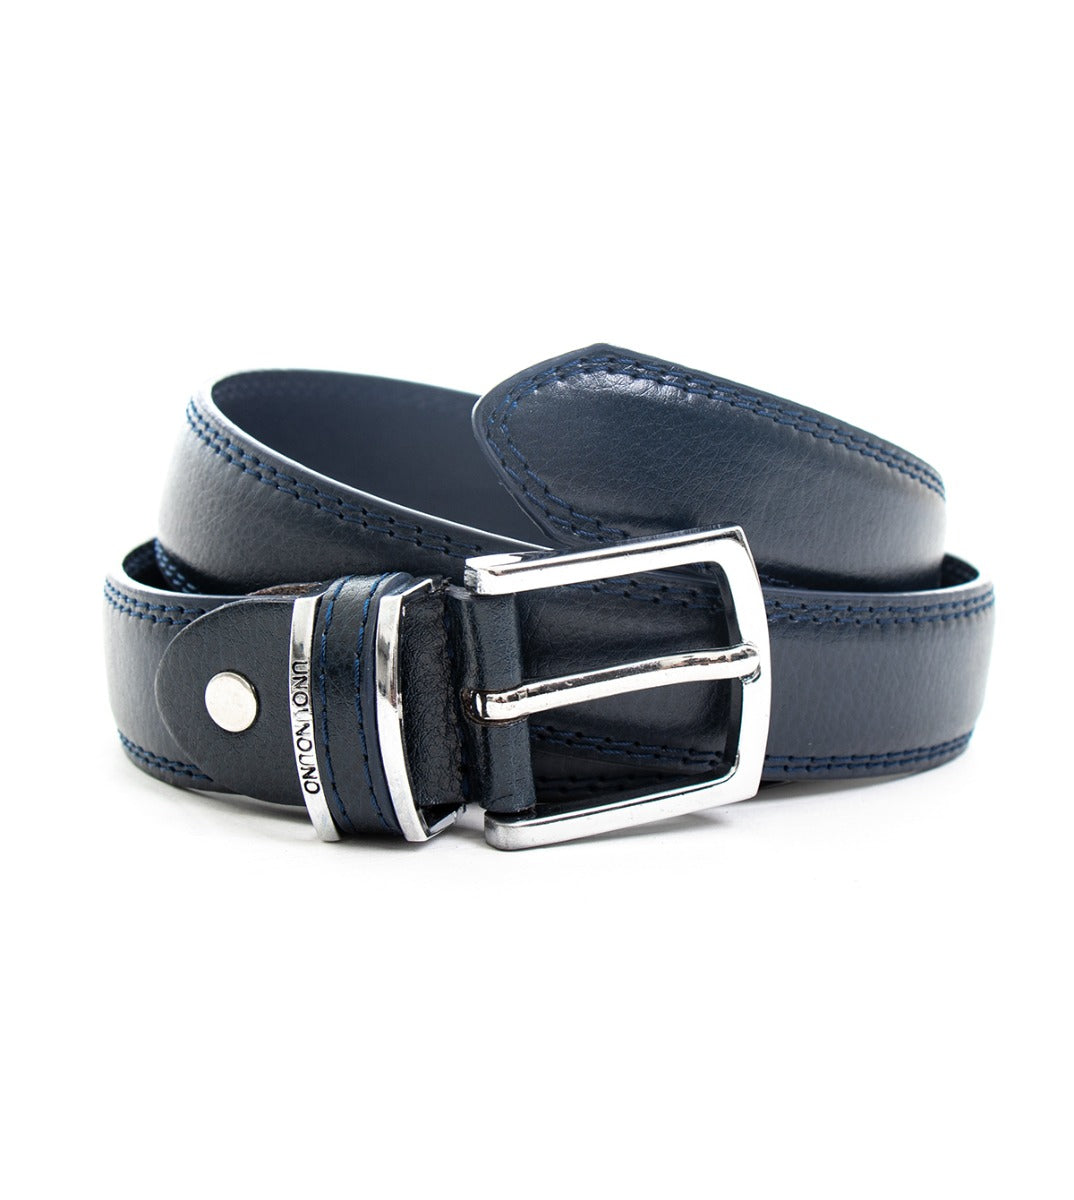 Men's Narrow Belt Adjustable Metal Buckle Blue Textured Faux Leather GIOSAL-A2072A